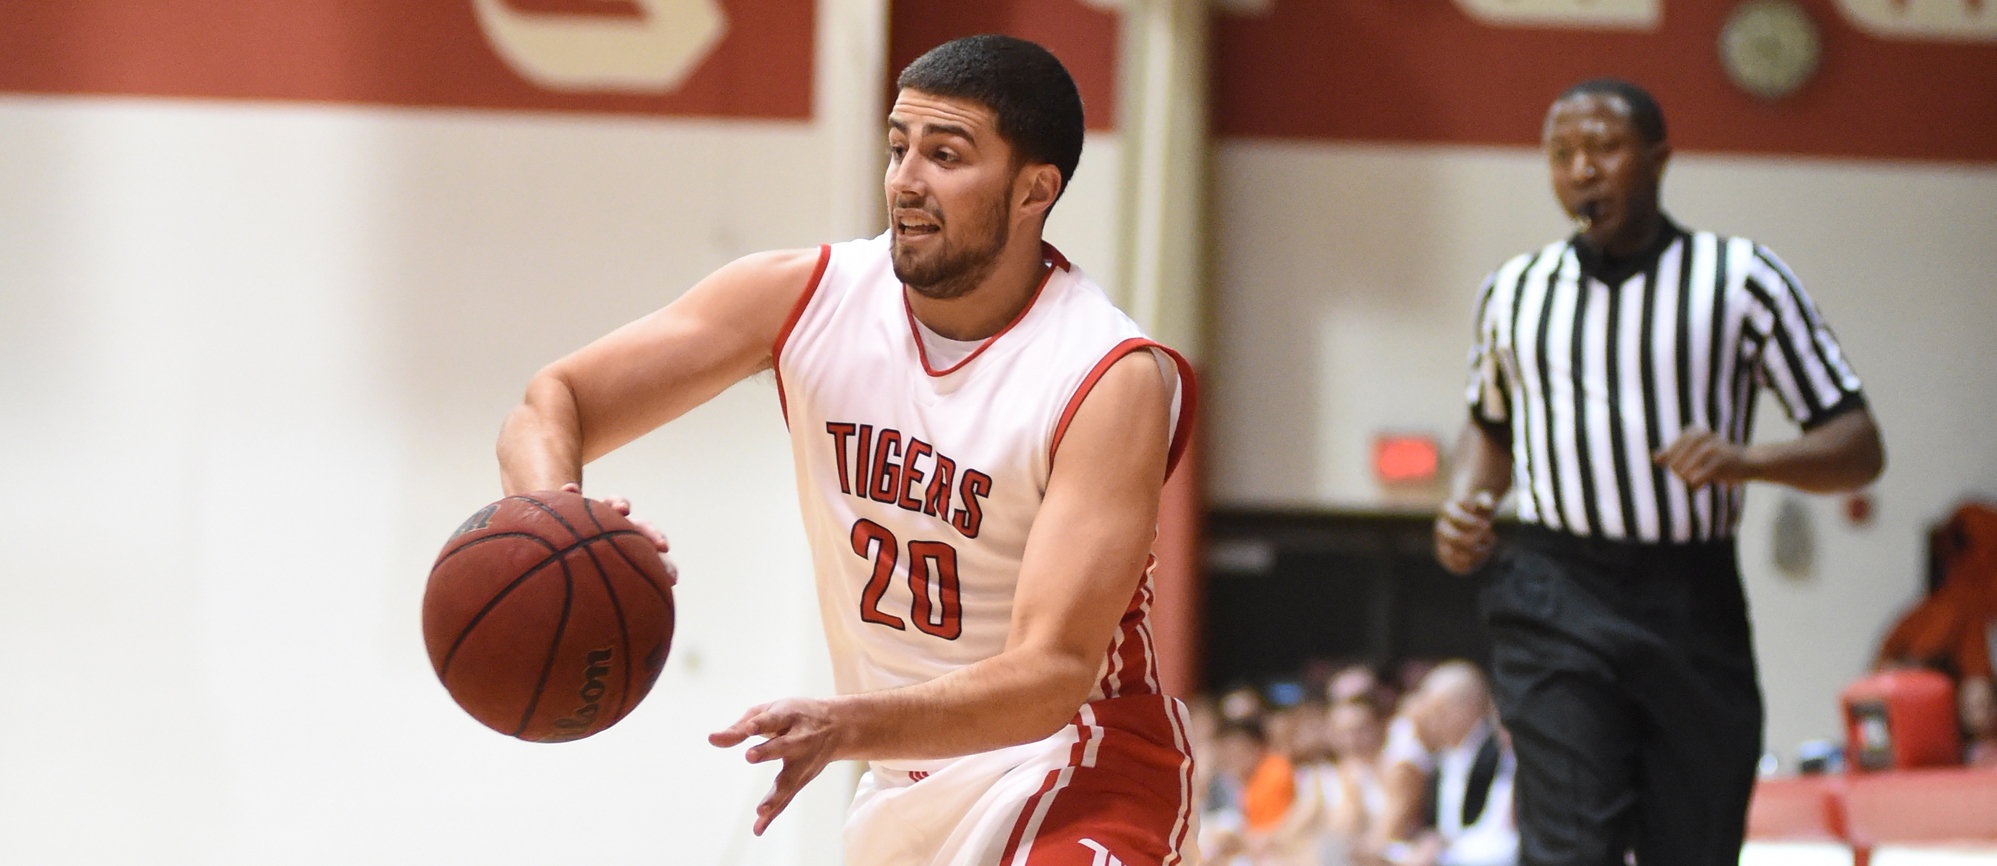 Tigers Drop NCAC Matchup to OWU 87-66